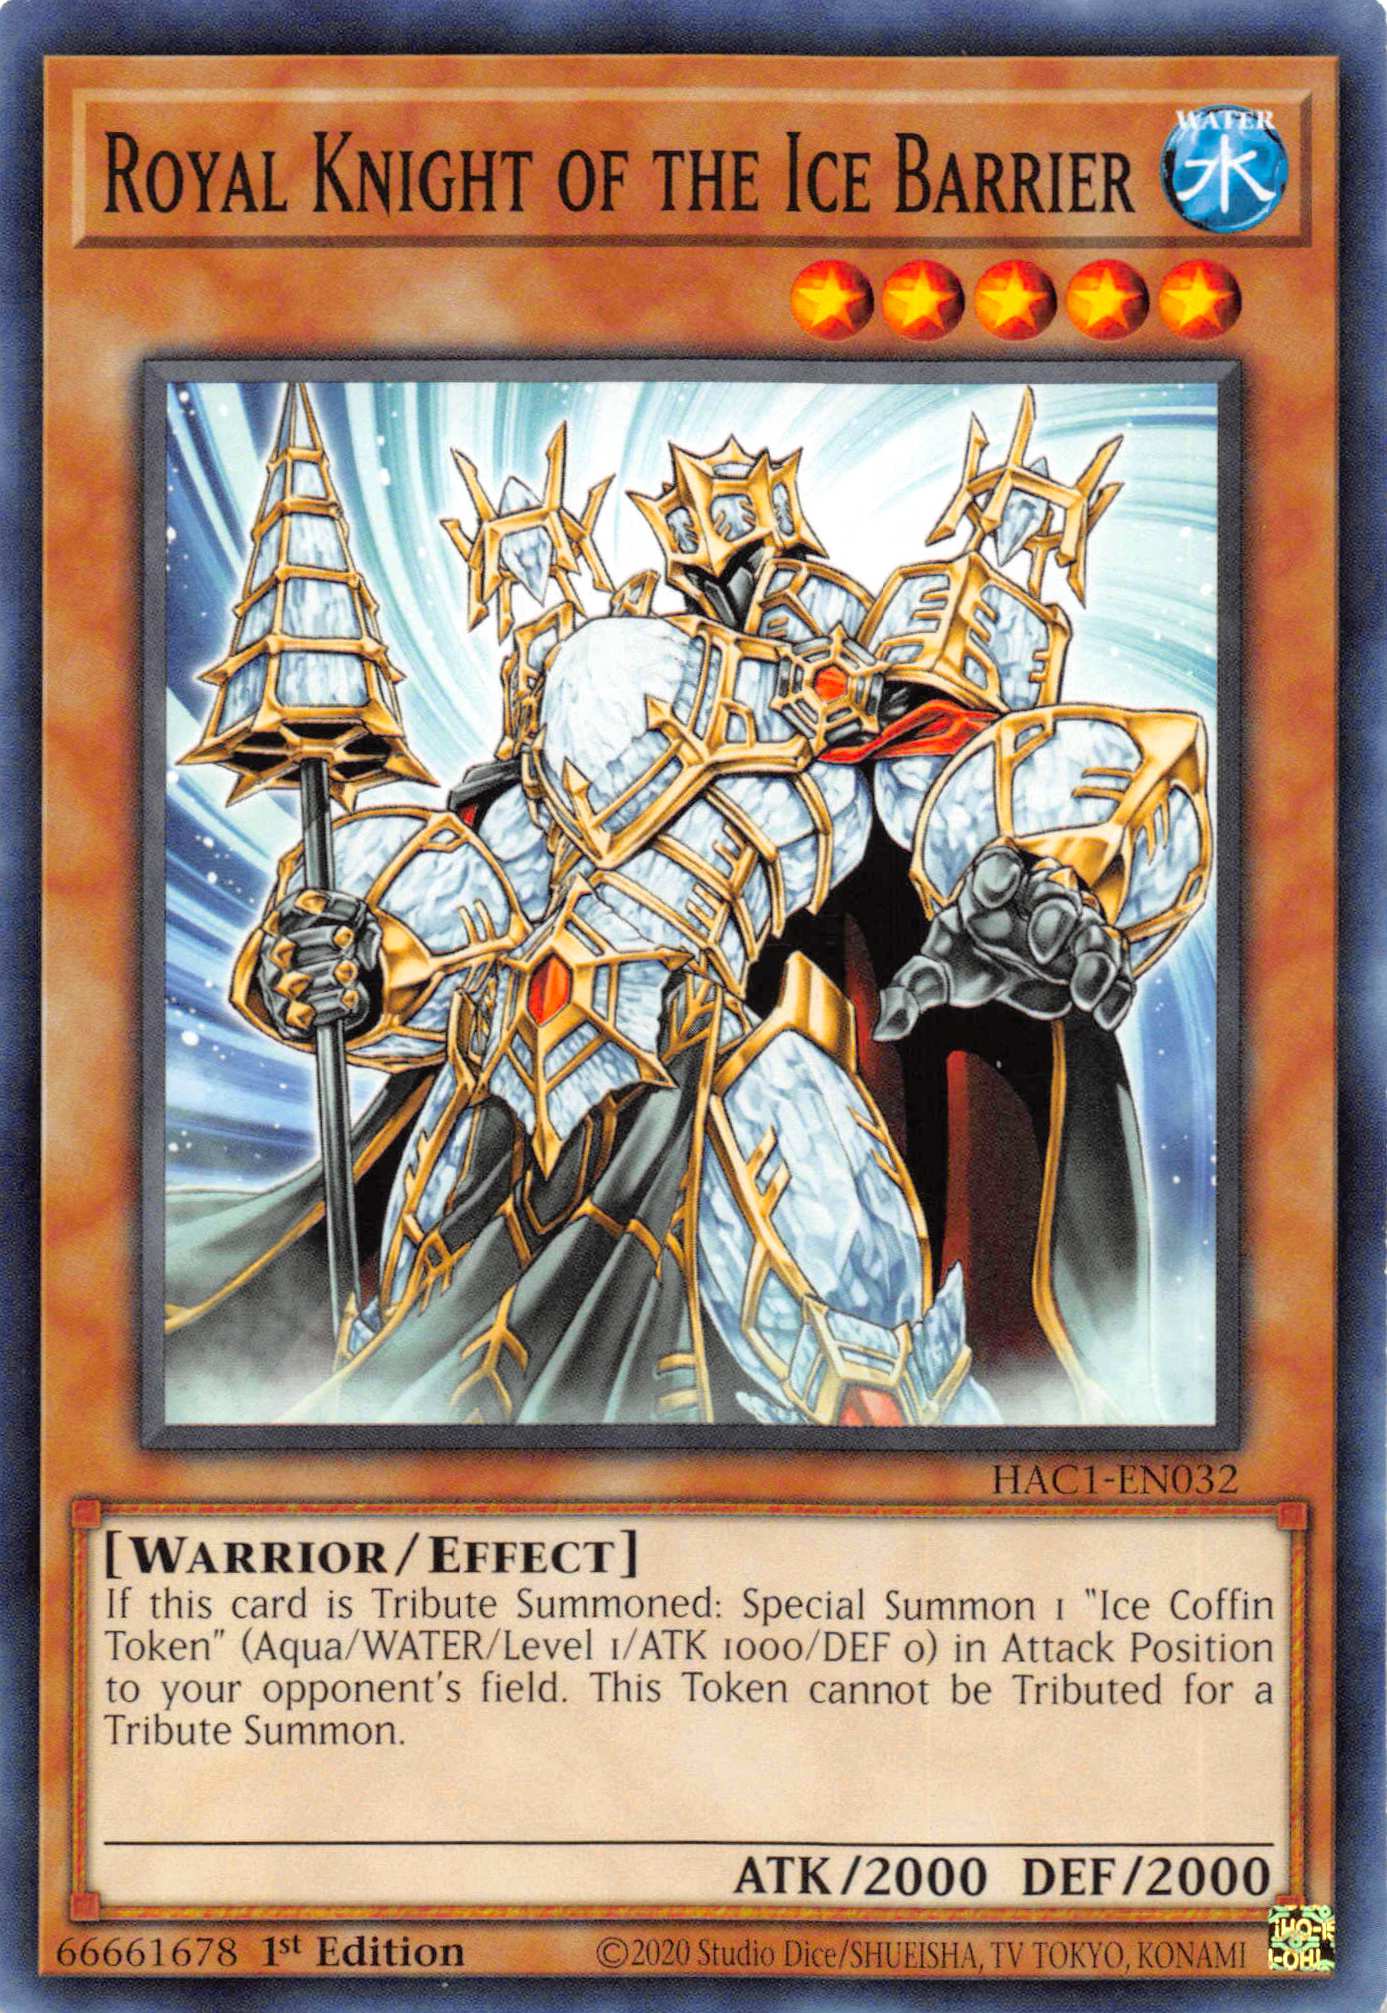 Royal Knight of the Ice Barrier [HAC1-EN032] Common - Duel Kingdom